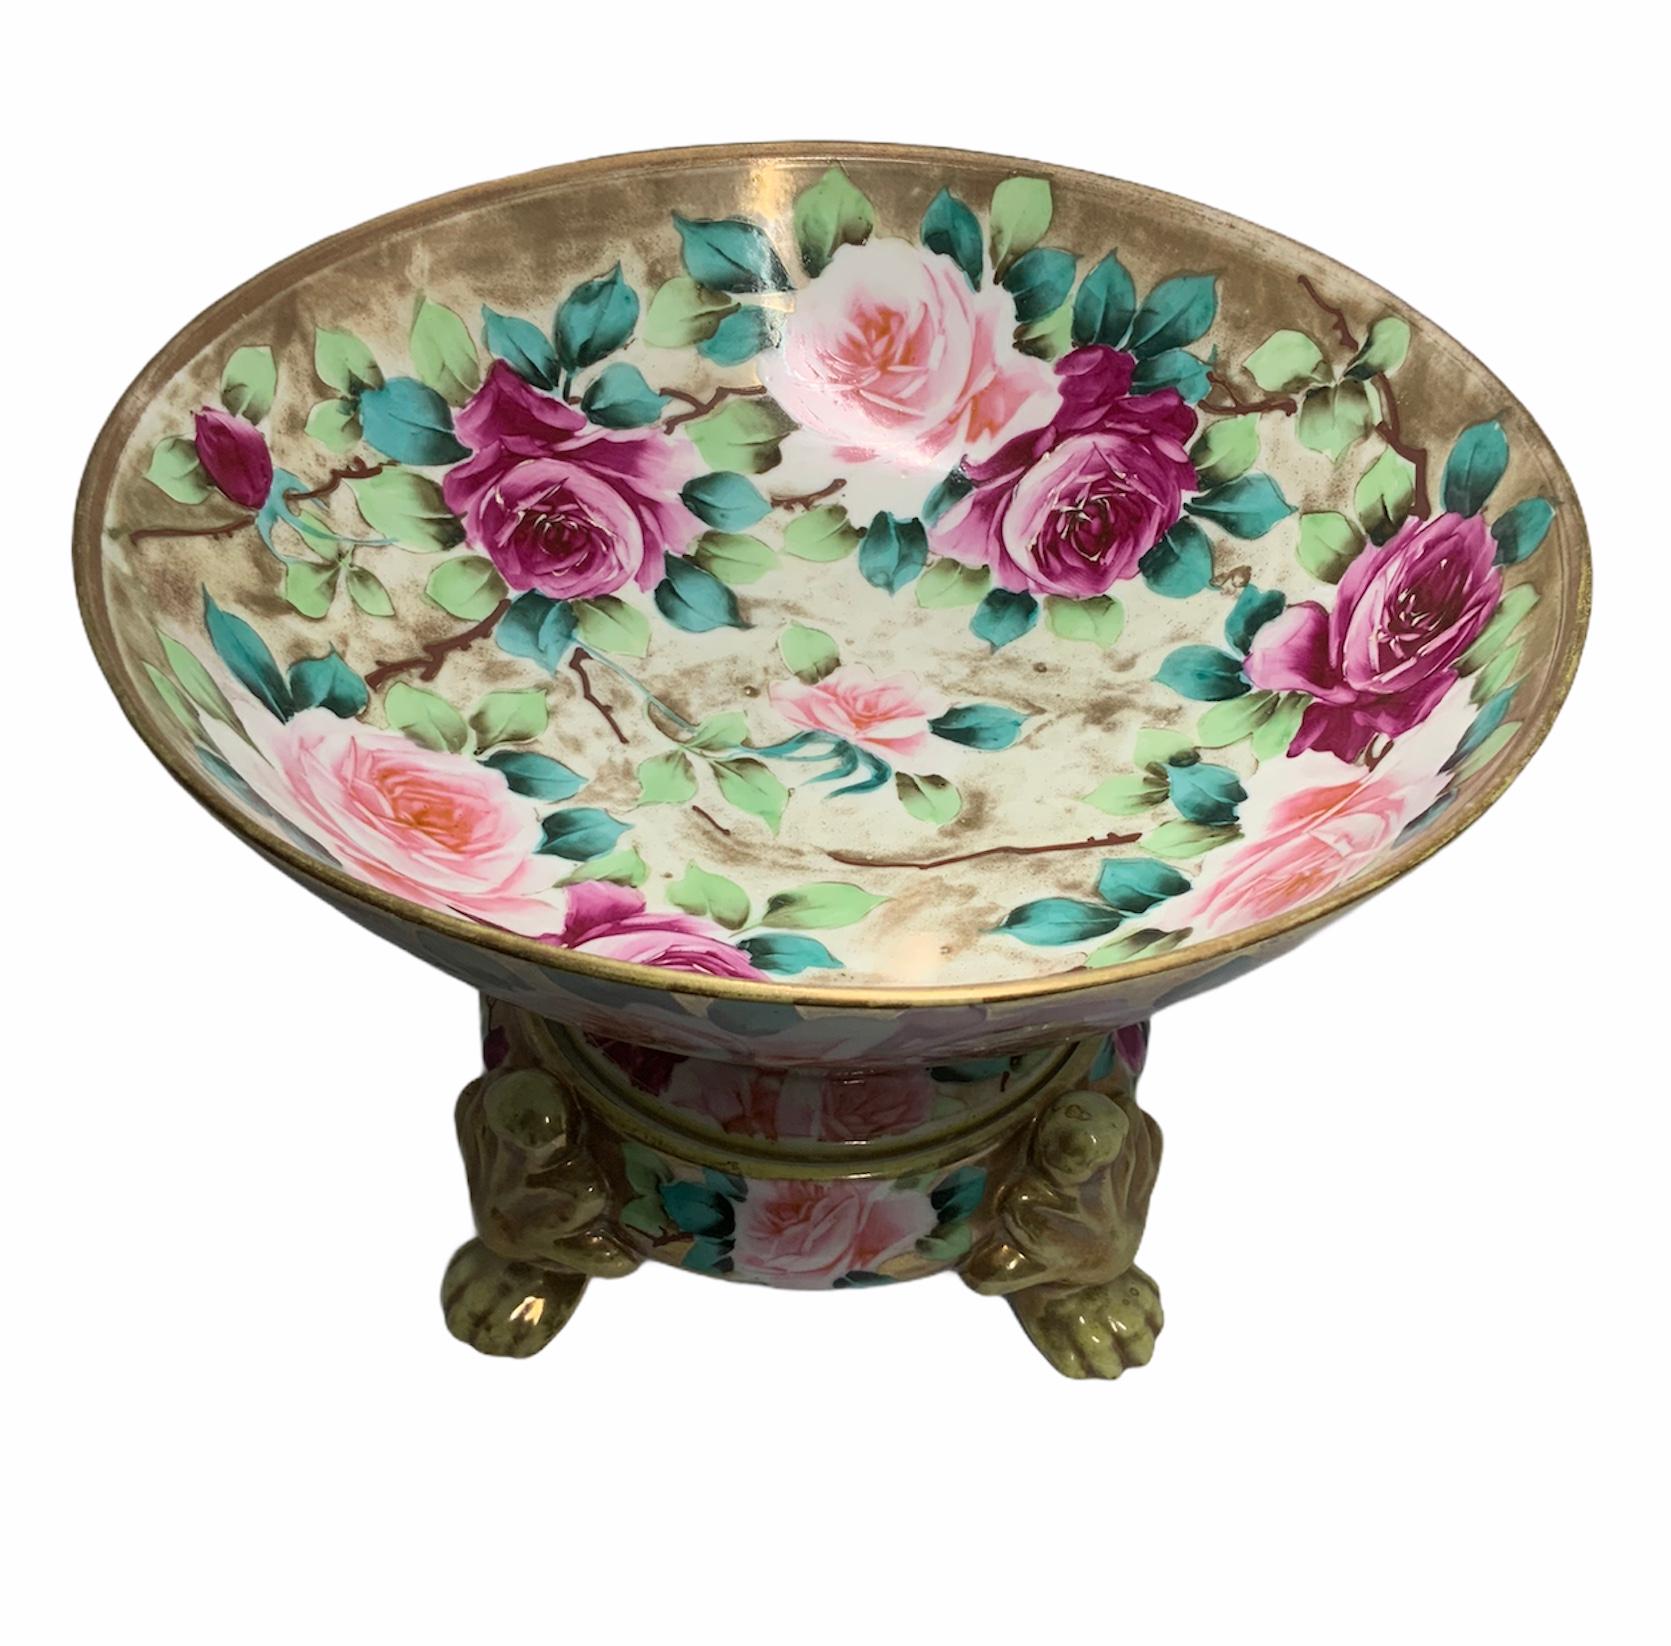 This a Nippon porcelain wide and round gilt bowl hand painted with large pale & dark pink roses with green foliage. The bowl stands in a round base with four lion’s paws. Under the base is the Nippon hallmark and is written “hand painted”.